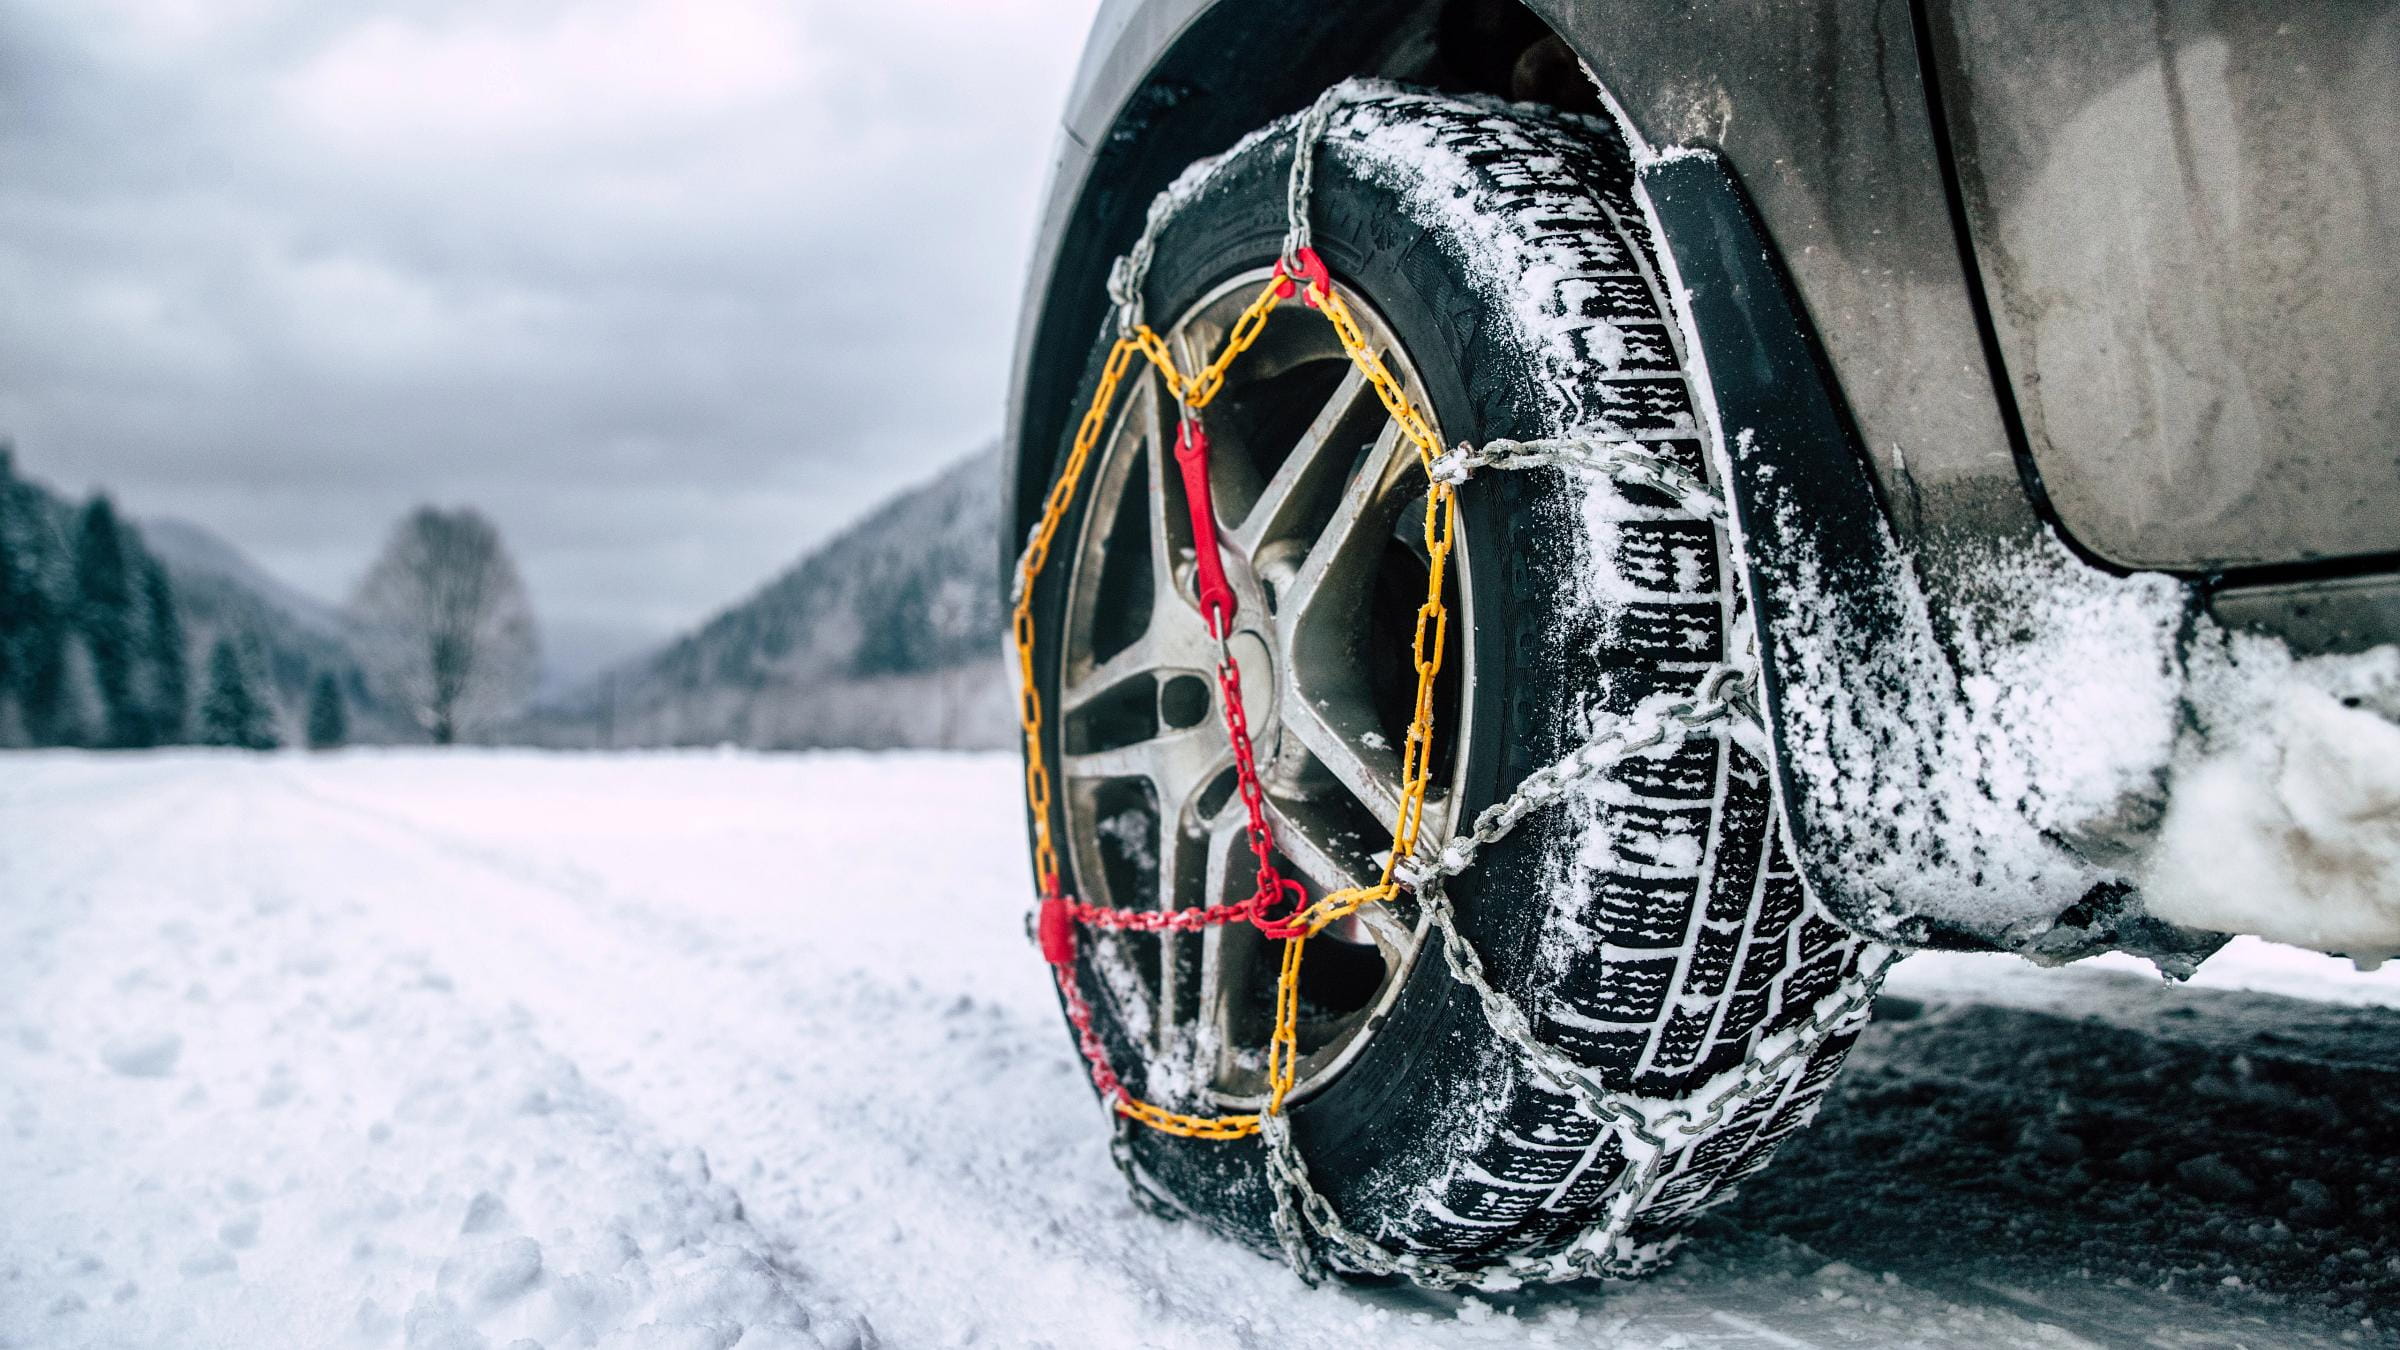 Snow chains on a car in the snow